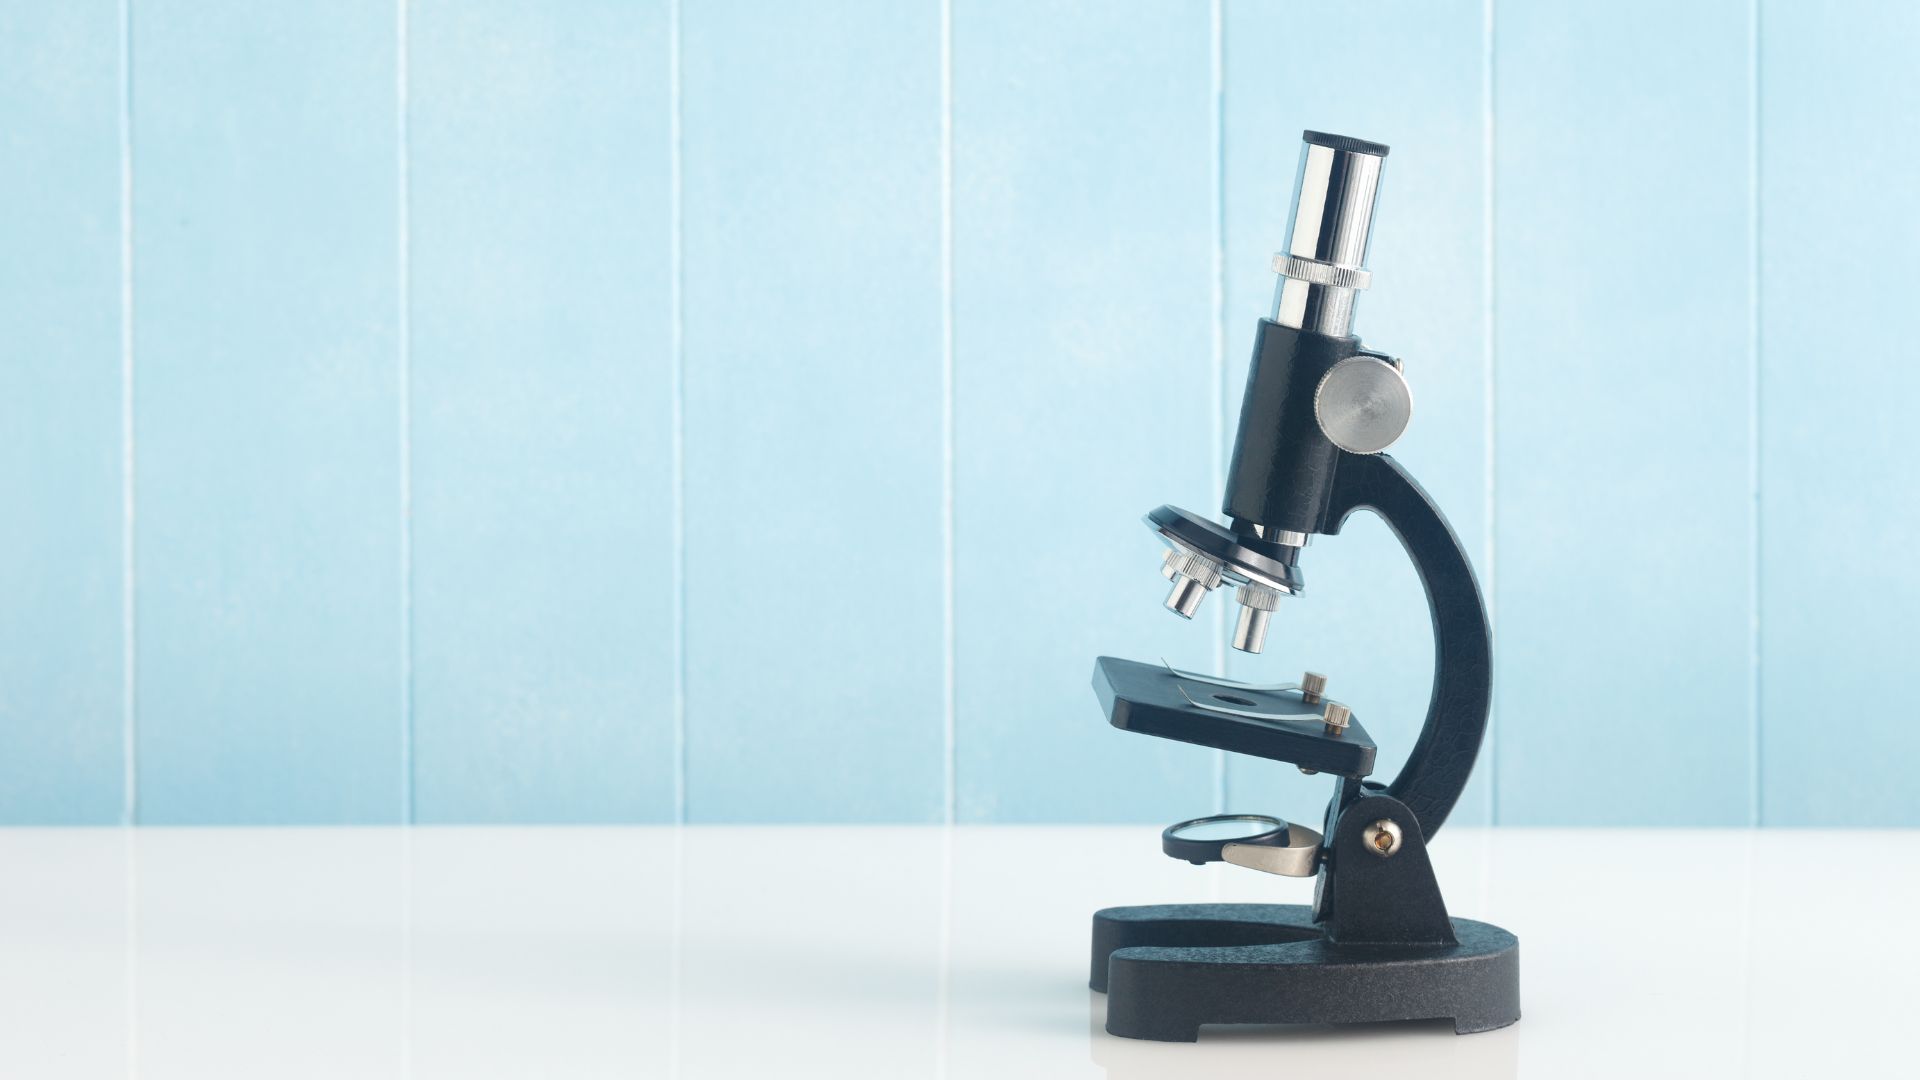 Picture of a microscope against a blue backdrop.